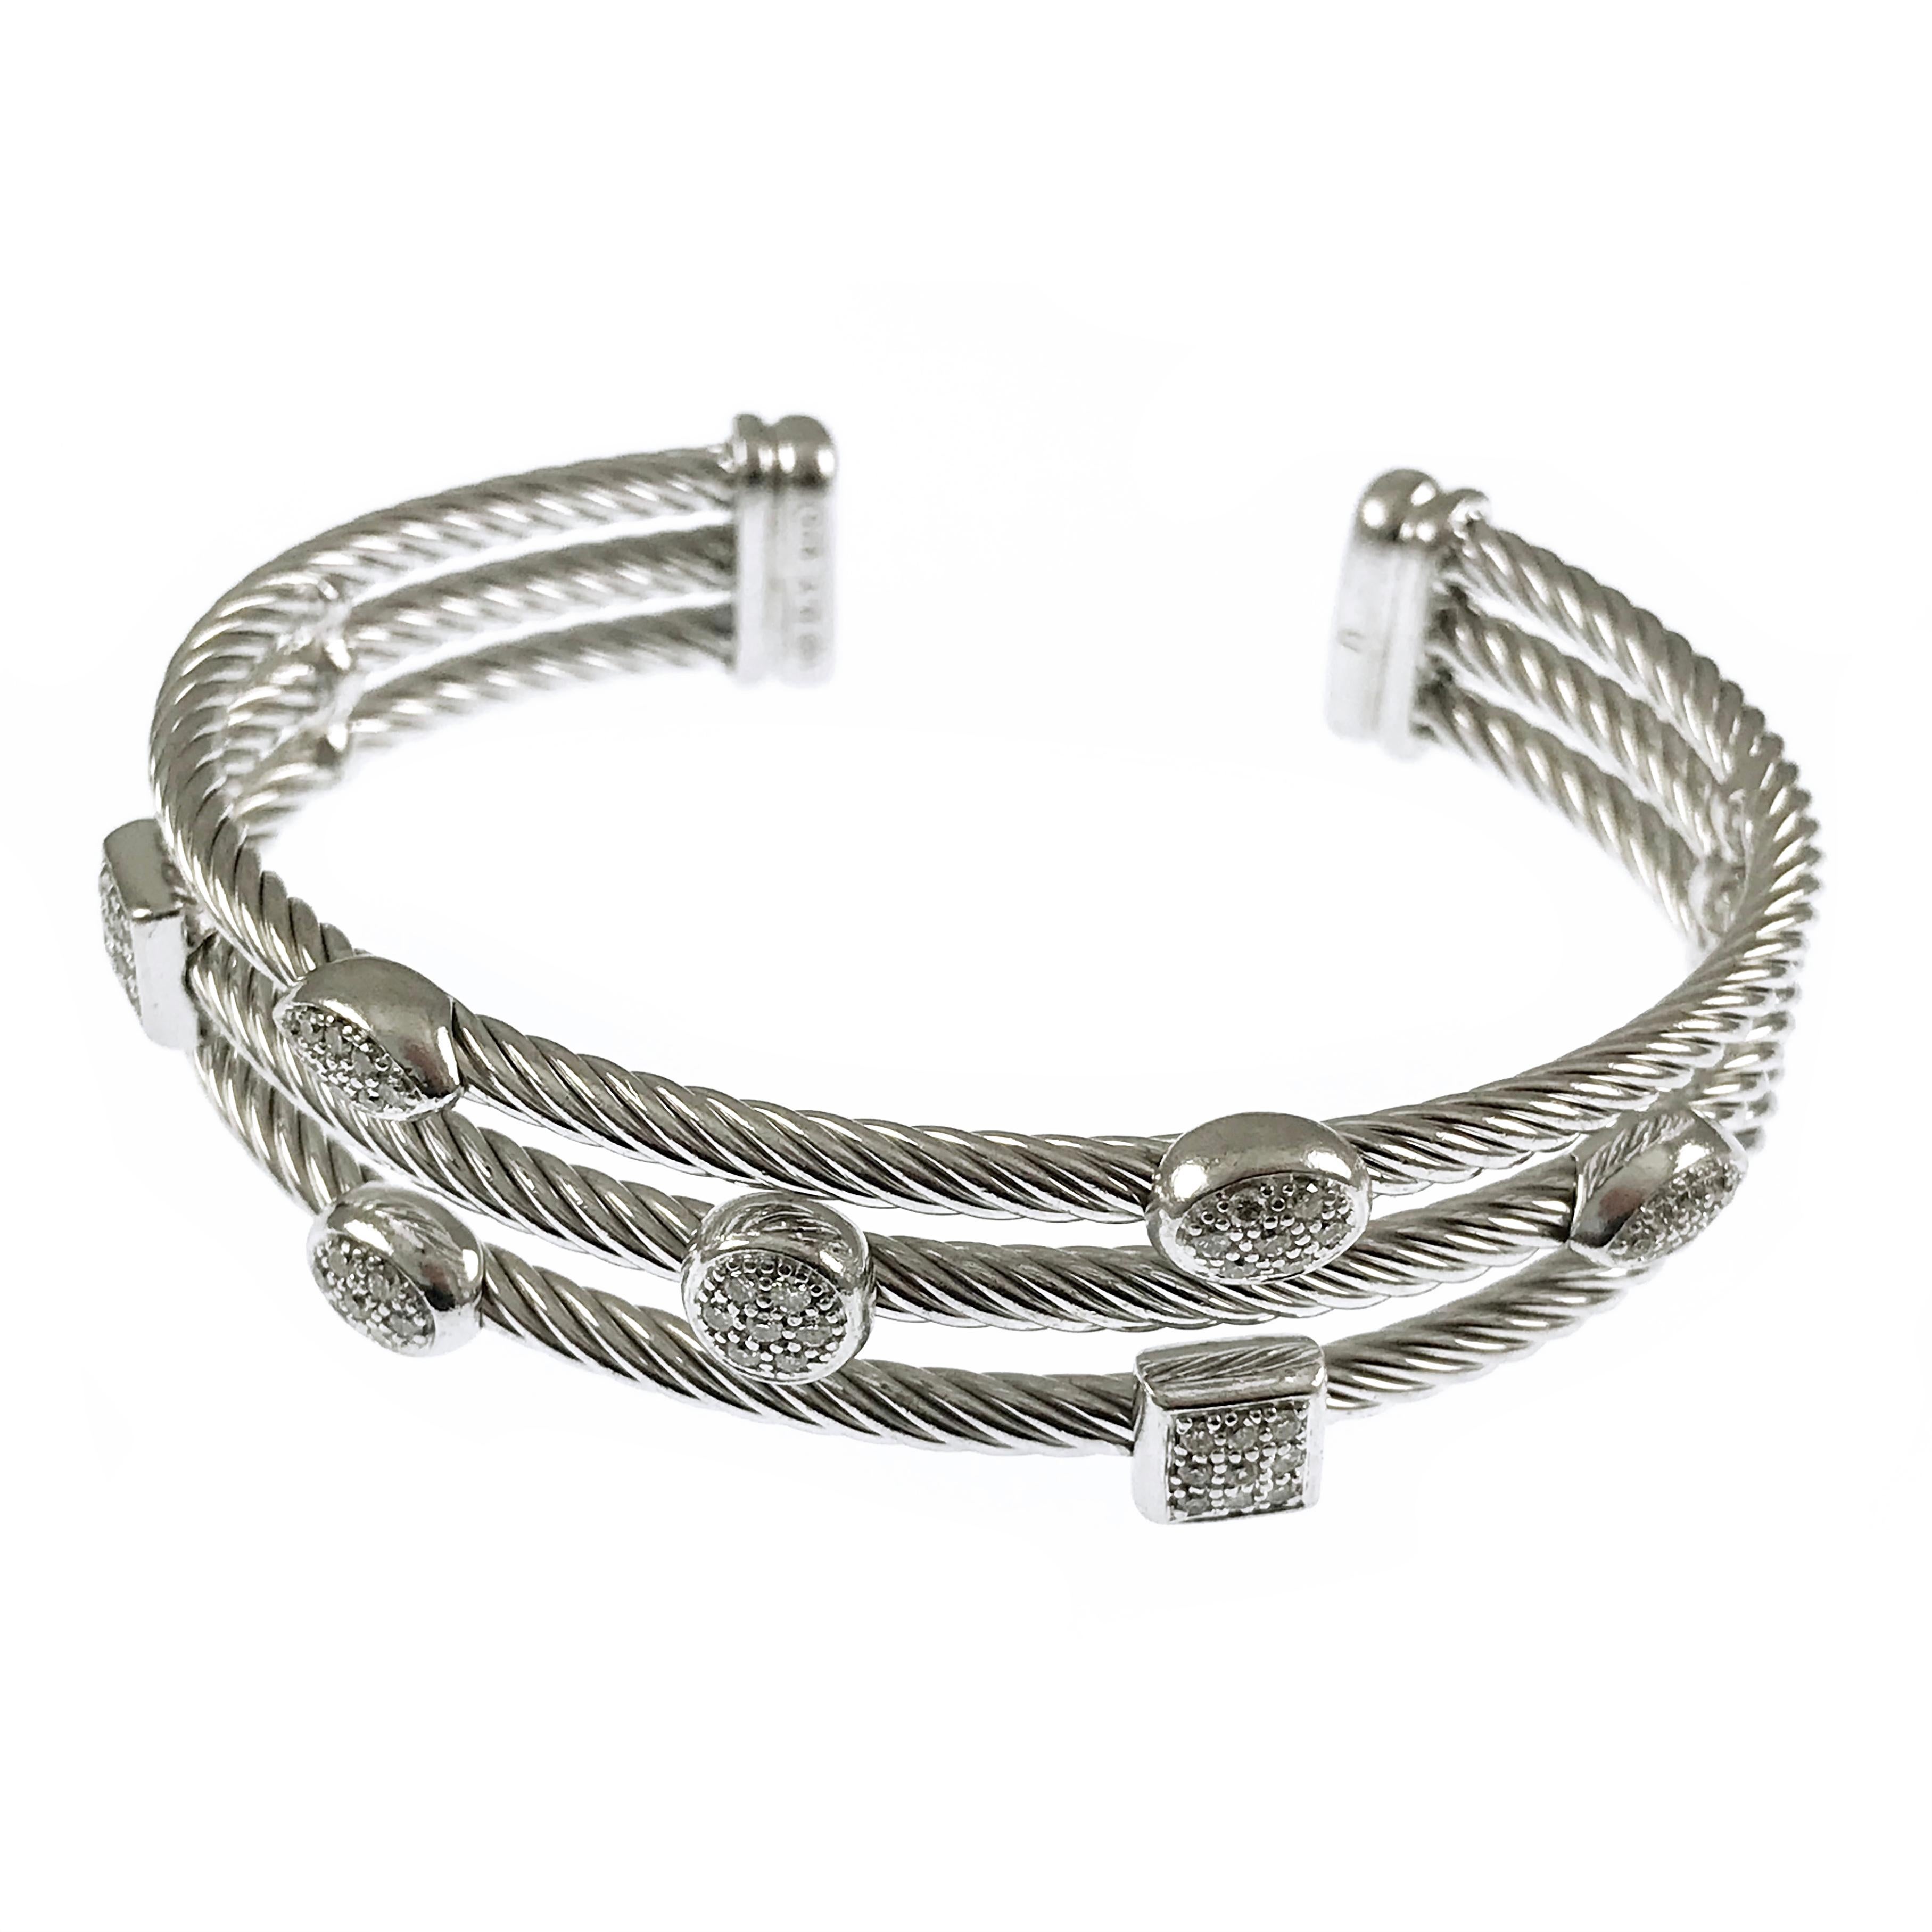 David Yurman Diamond Sterling Silver ‘Confetti’ Three-Row Cable Cuff Bracelet. This gorgeous cuff is crafted from sterling silver with a high polished finish. This piece has the Yurman signature cable band design, three cable wire bands joined at